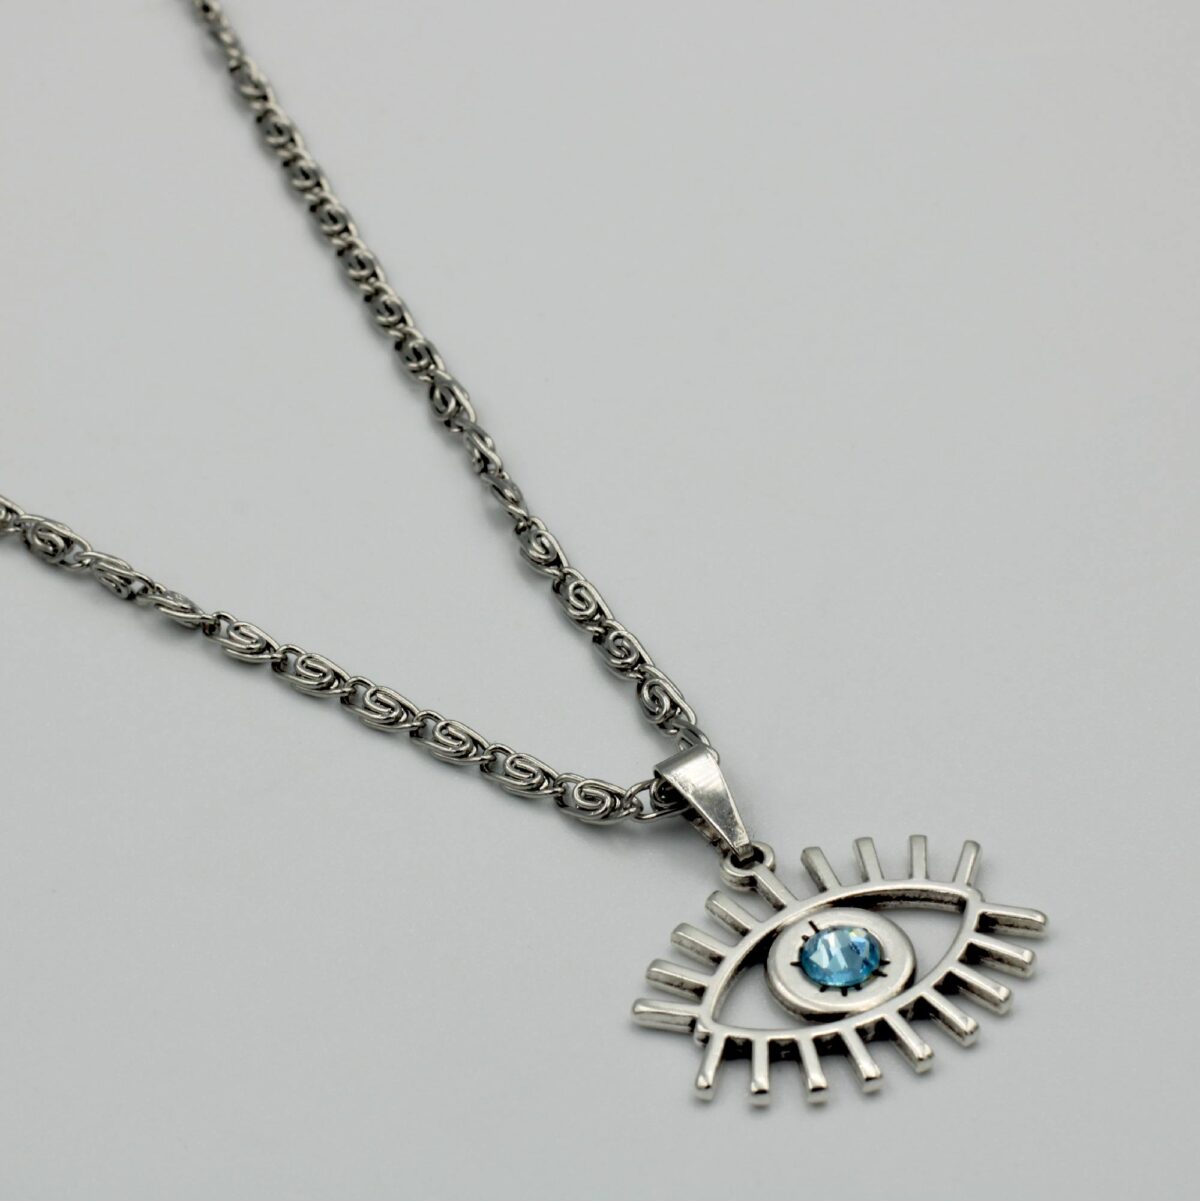 Women's Silver Plated Necklace 999 and Eye Shape Motif